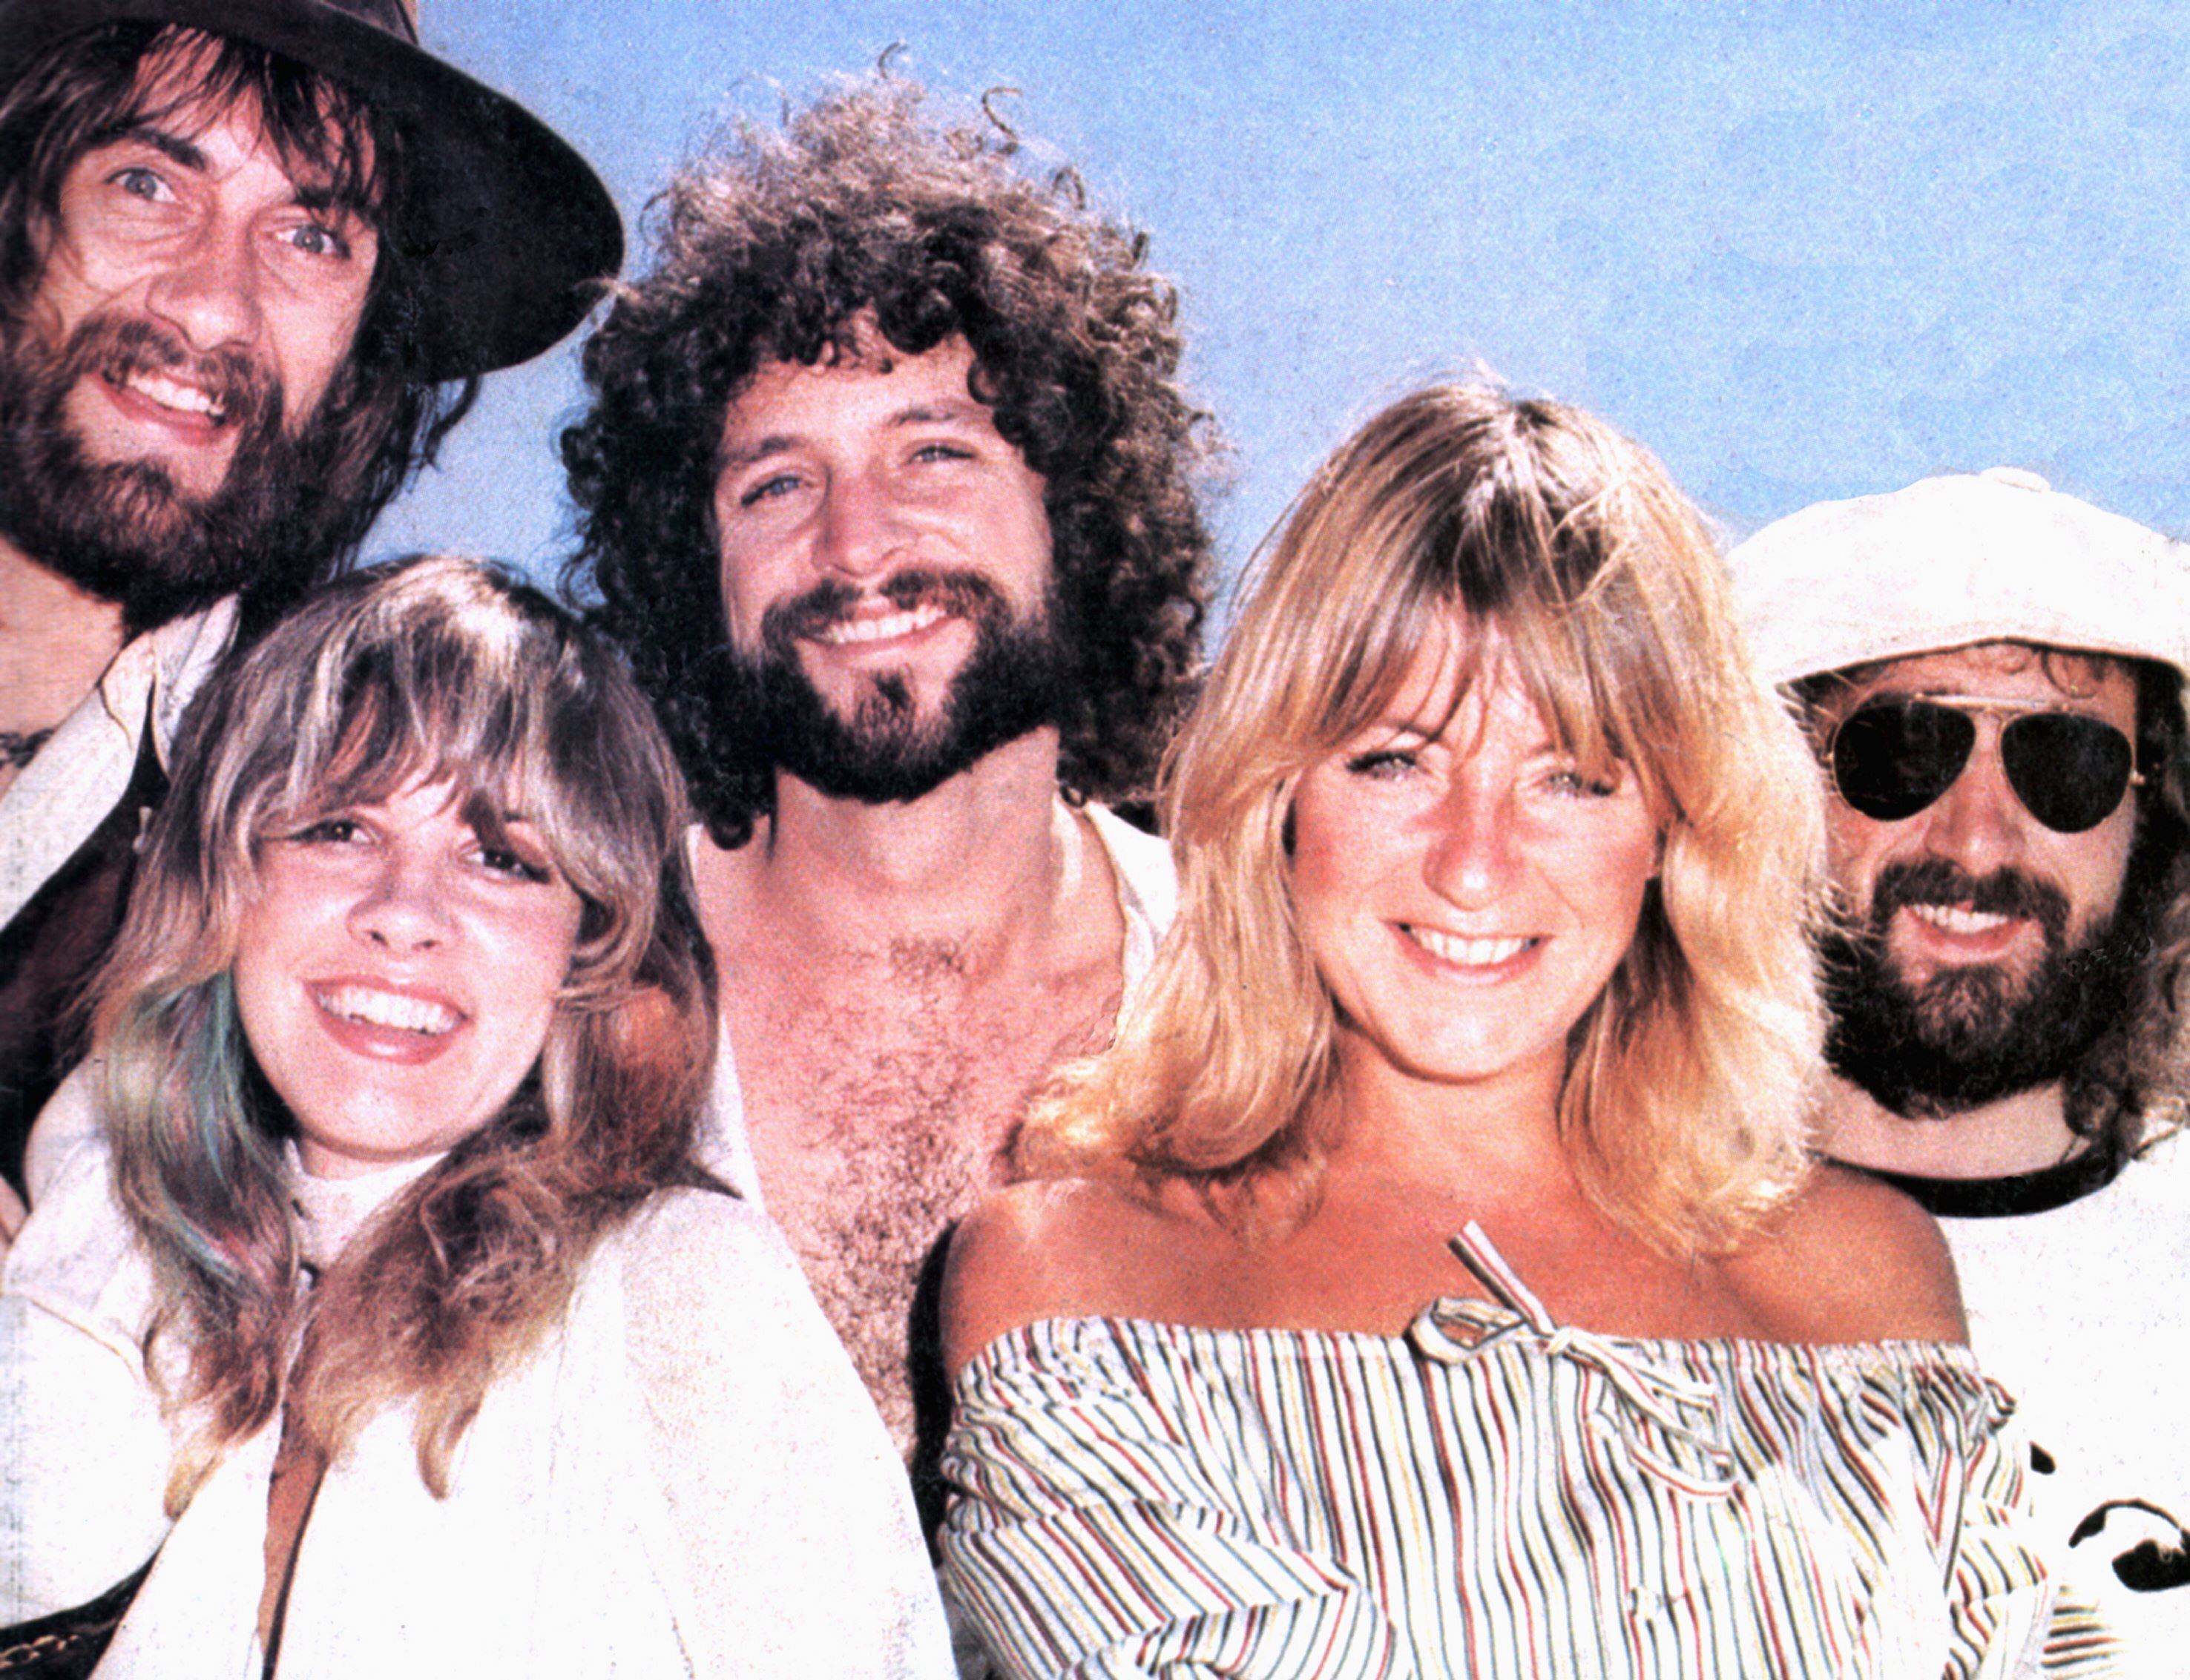 Left to right: Mick Fleetwood, Stevie Nicks, Lindsey Buckingham, Christine McVie, and John McVie posed for a group photo in 1975. | Source: Getty Images